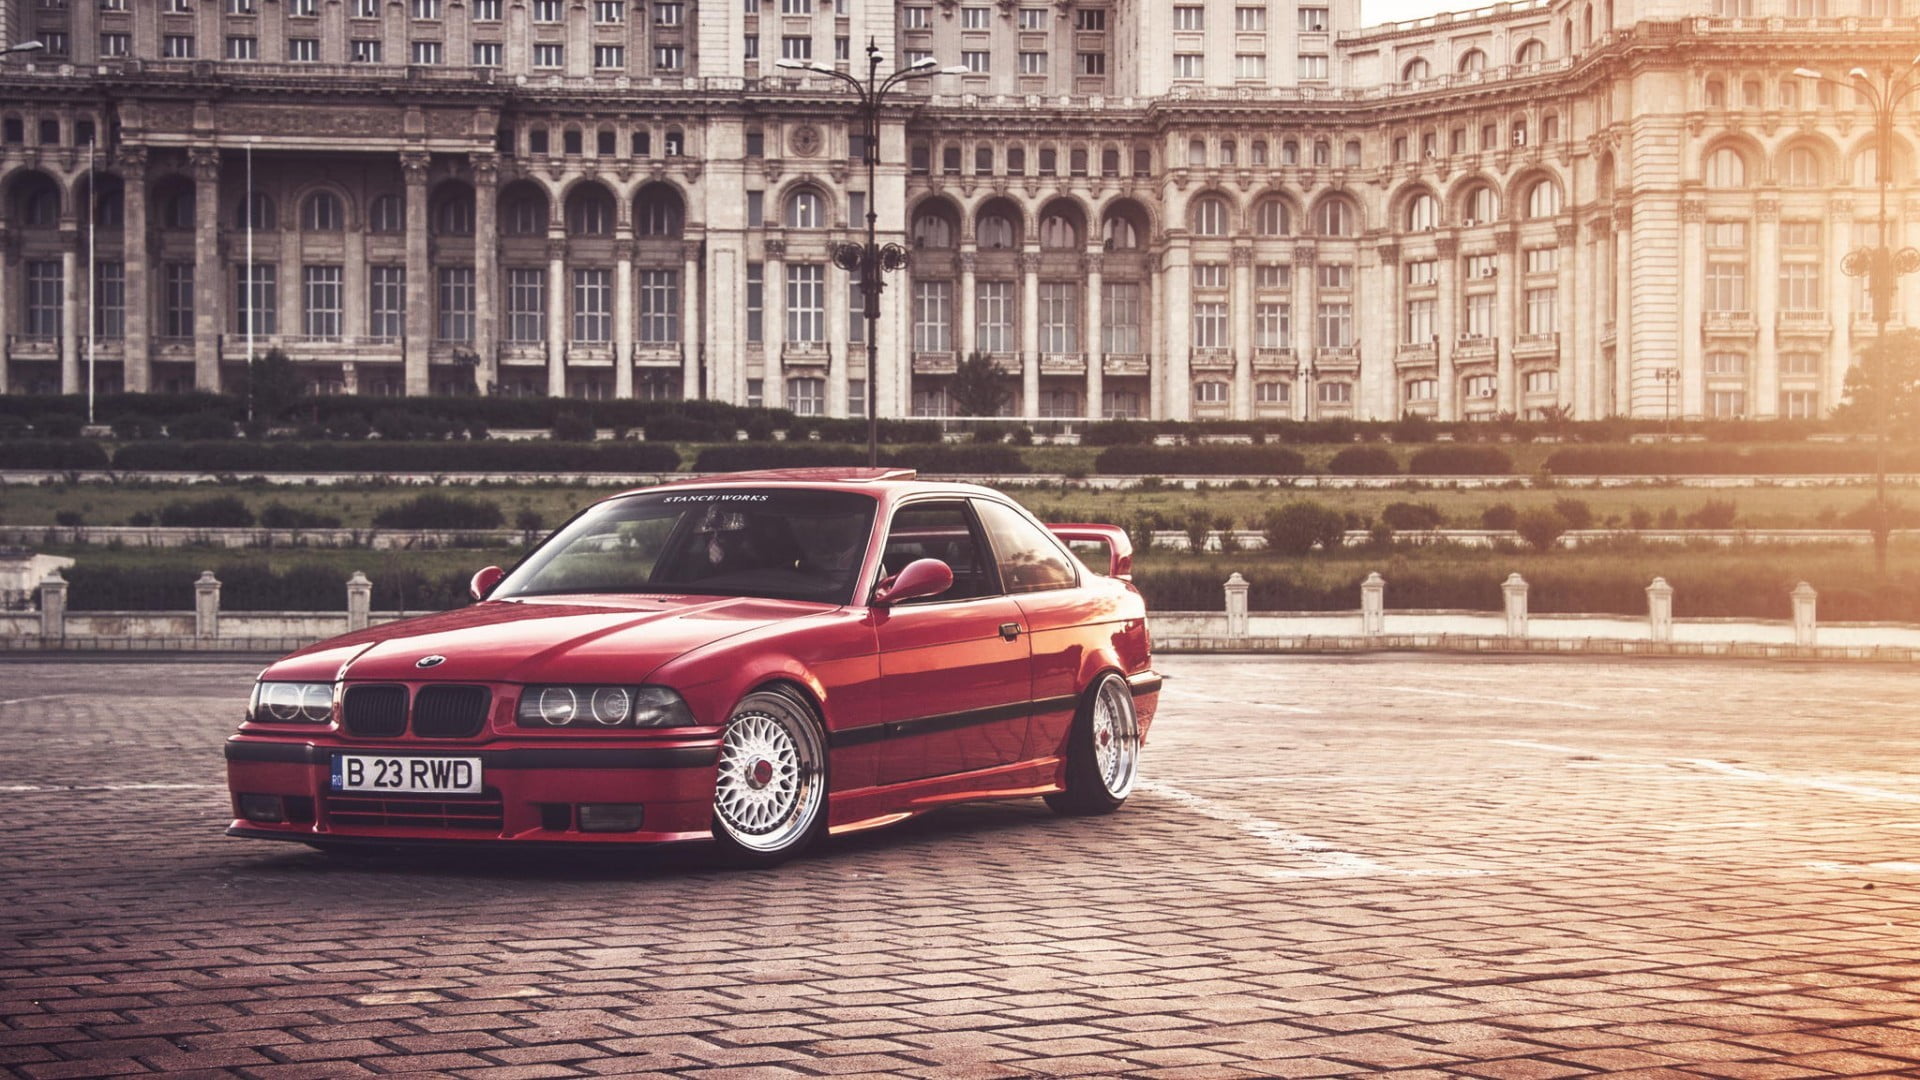 Red Bmw Coupe Bucharest Bmw E36 Stance Bmw Hd Wallpaper Wallpaper Flare